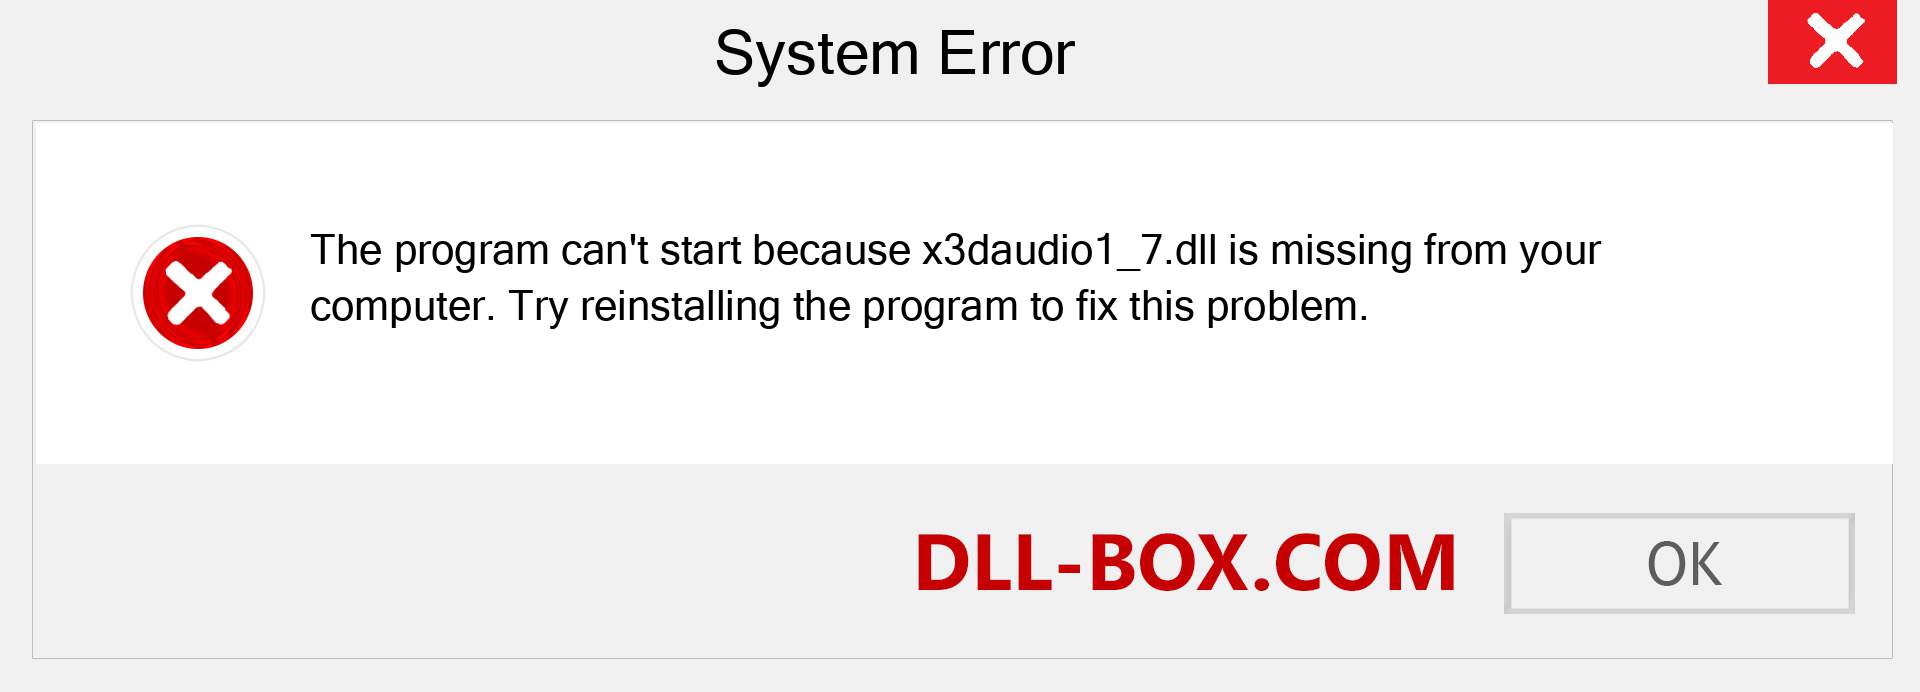  x3daudio1_7.dll file is missing?. Download for Windows 7, 8, 10 - Fix  x3daudio1_7 dll Missing Error on Windows, photos, images